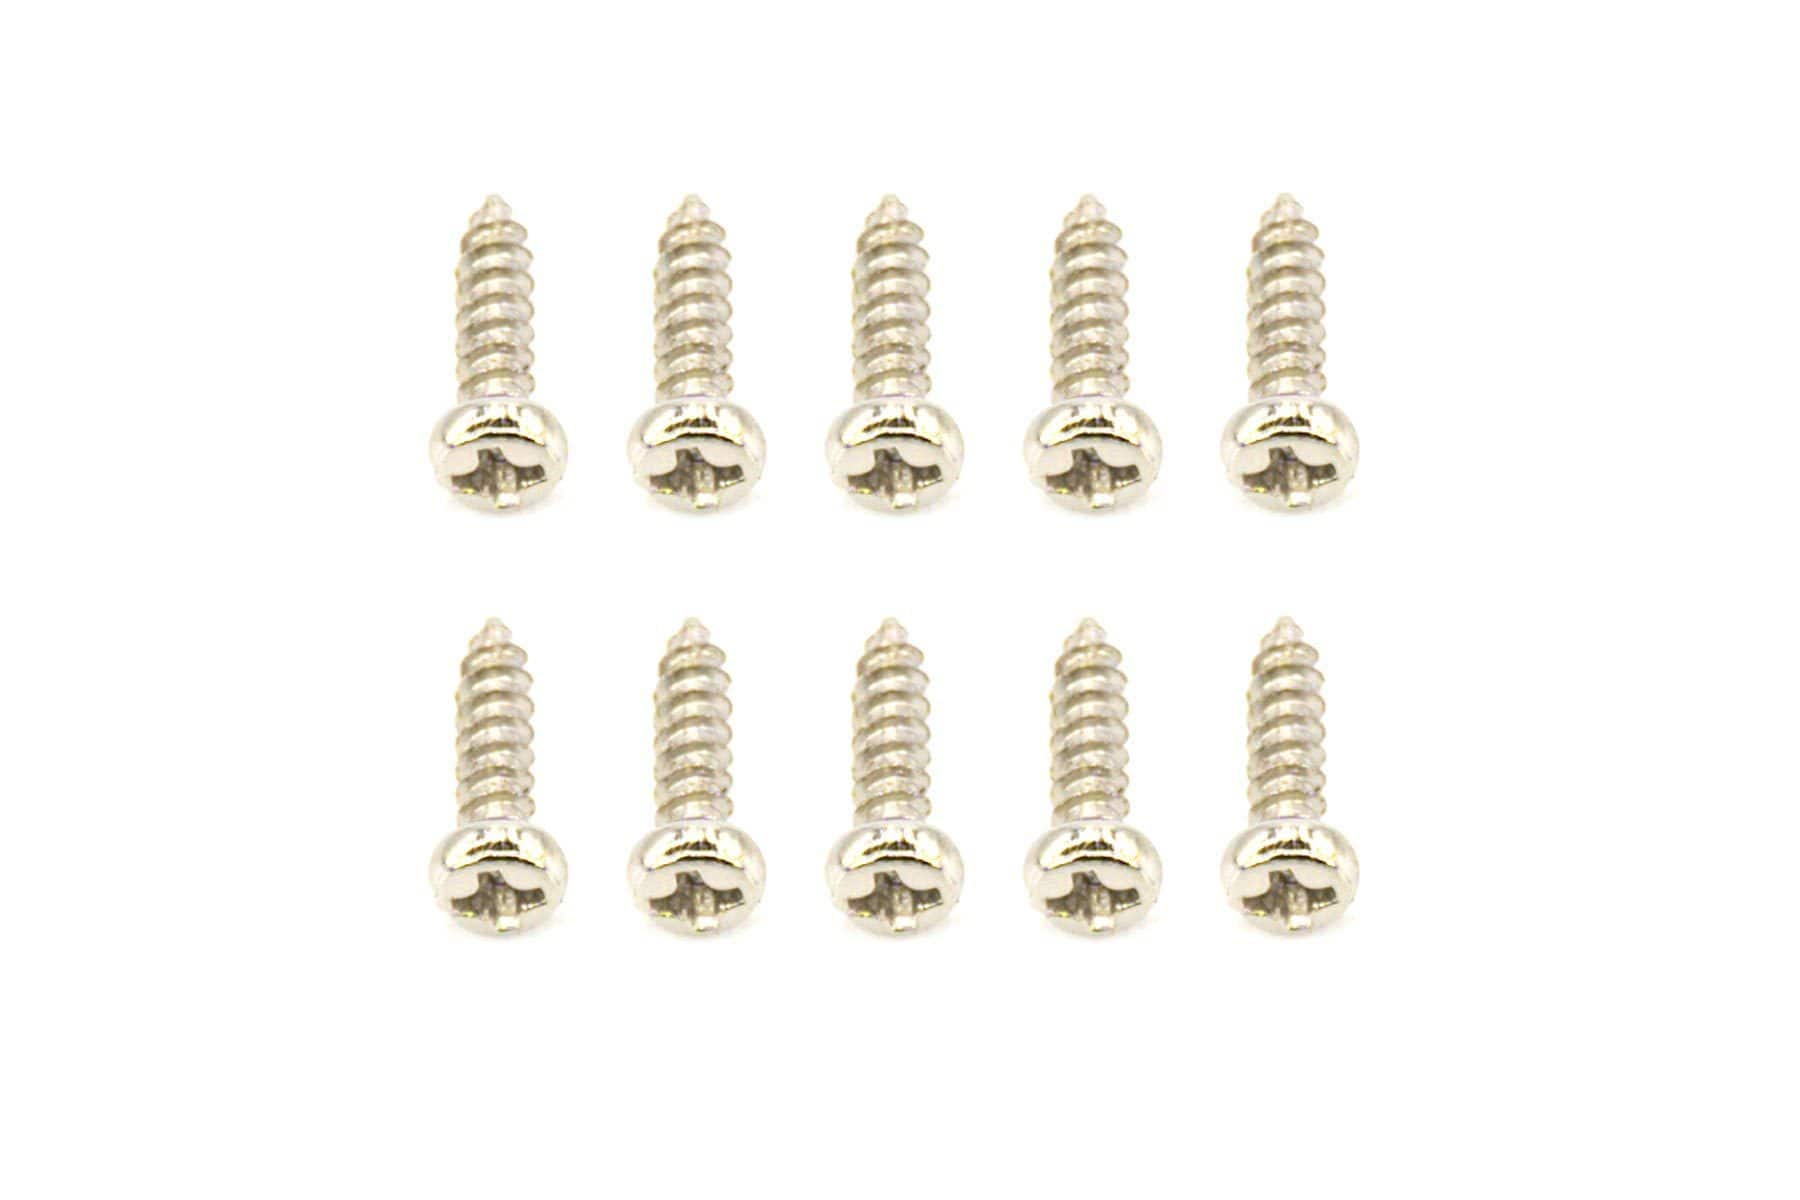 BenchCraft 2mm x 8mm Self-Tapping Screws (10 Pack)